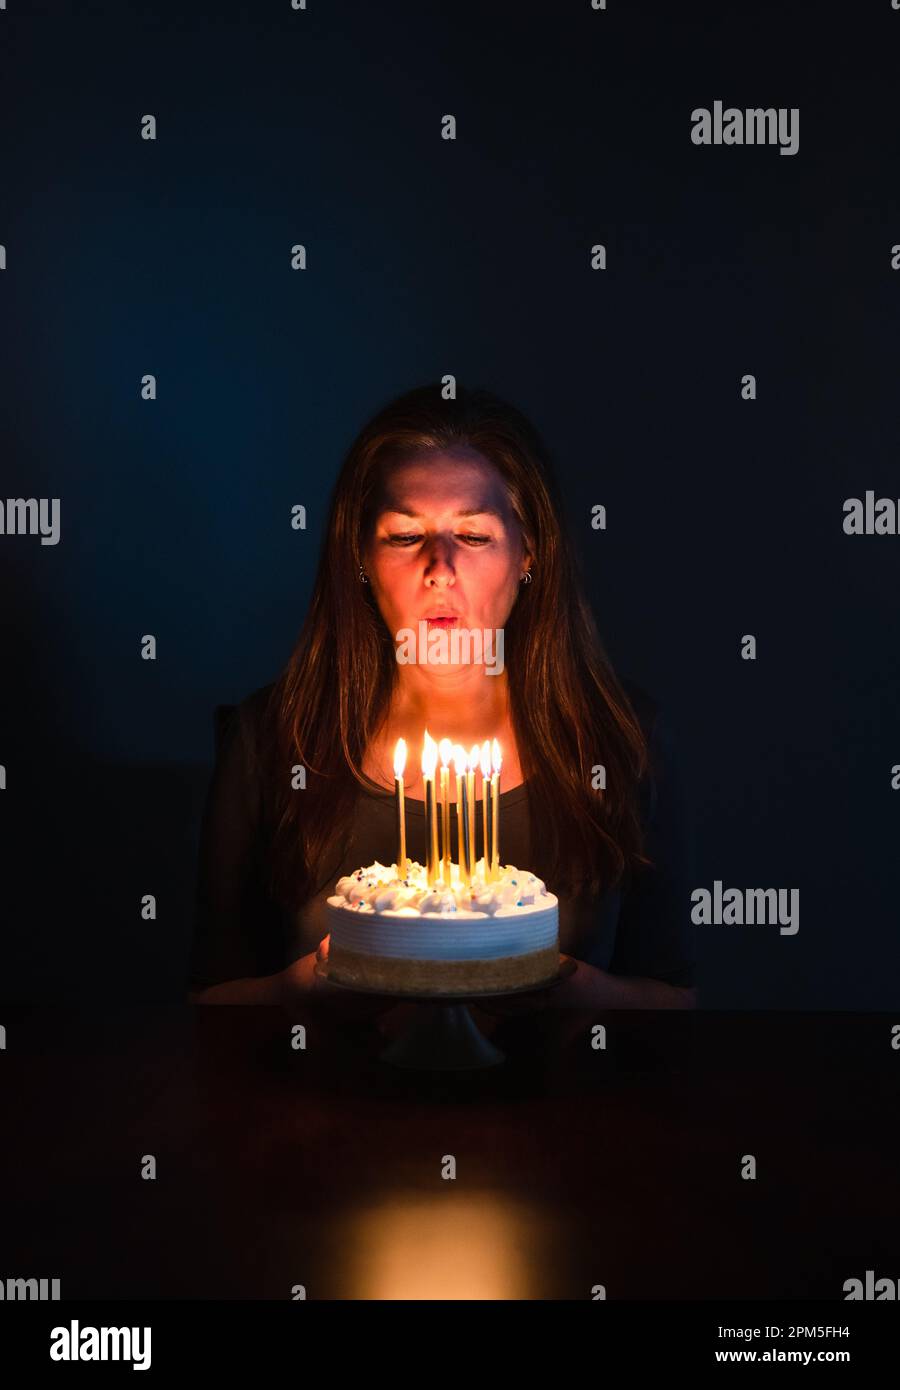 Attractive woman blowing out candles on birthday cake in dark room. Stock Photo